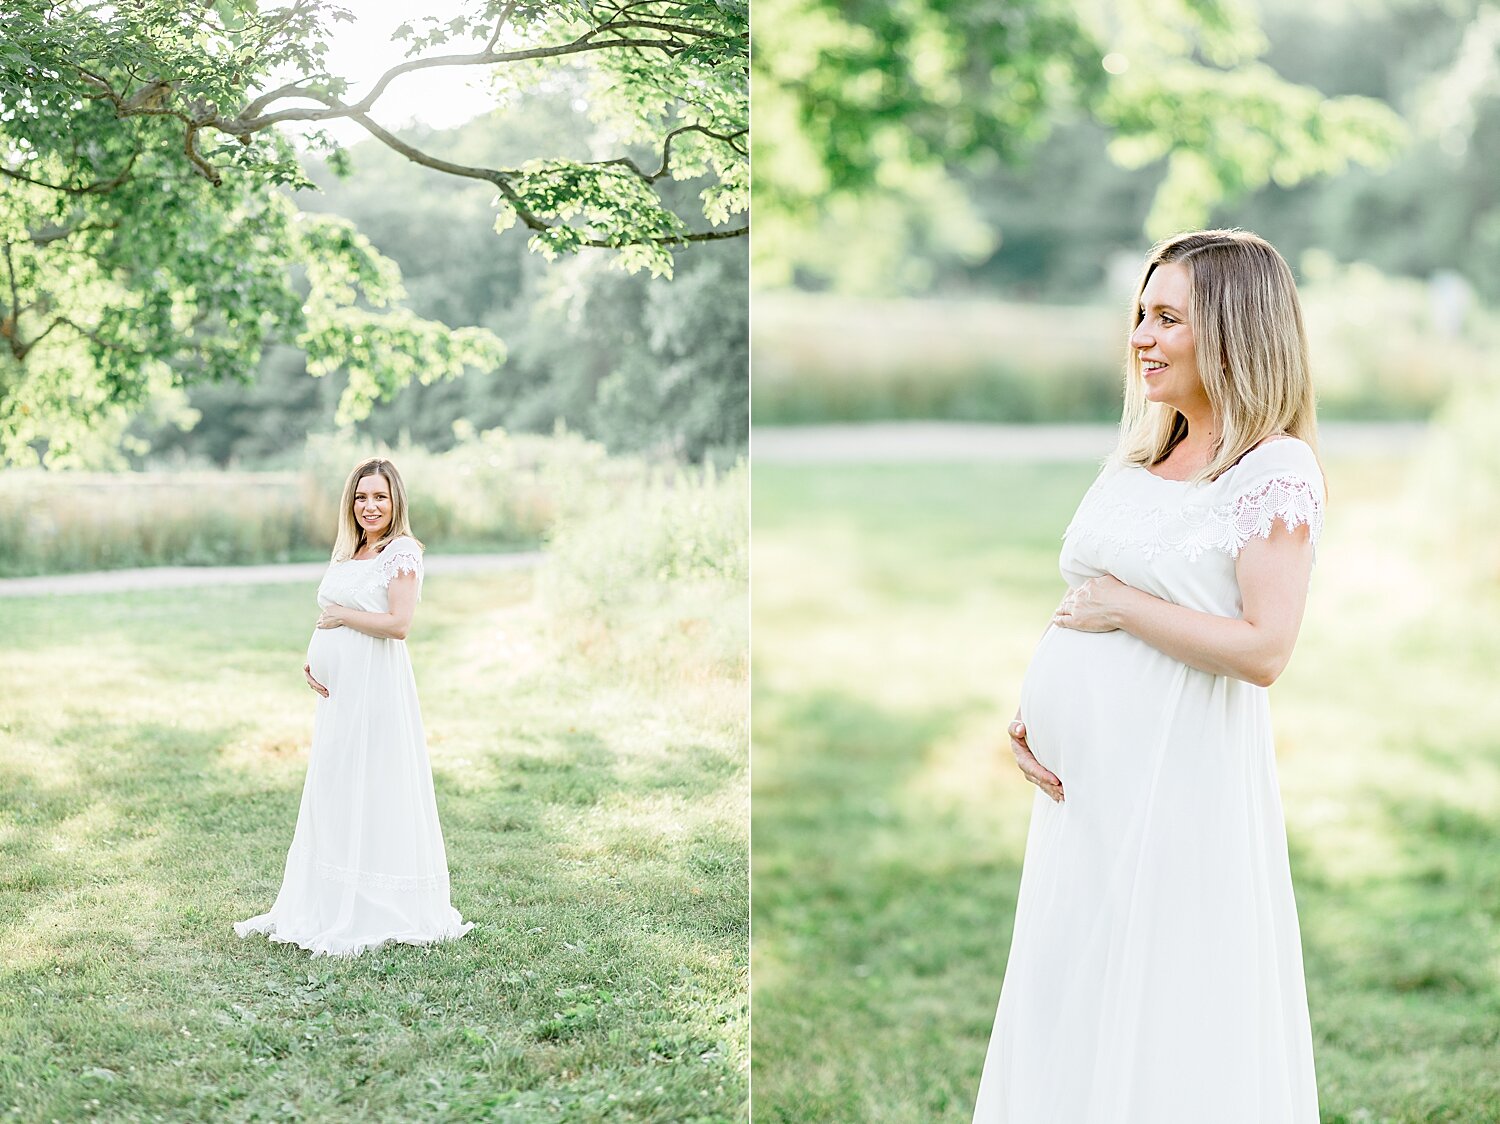 Maternity photoshoot at Waveny Park in Darien, CT. Photos by Kristin Wood Photography. 